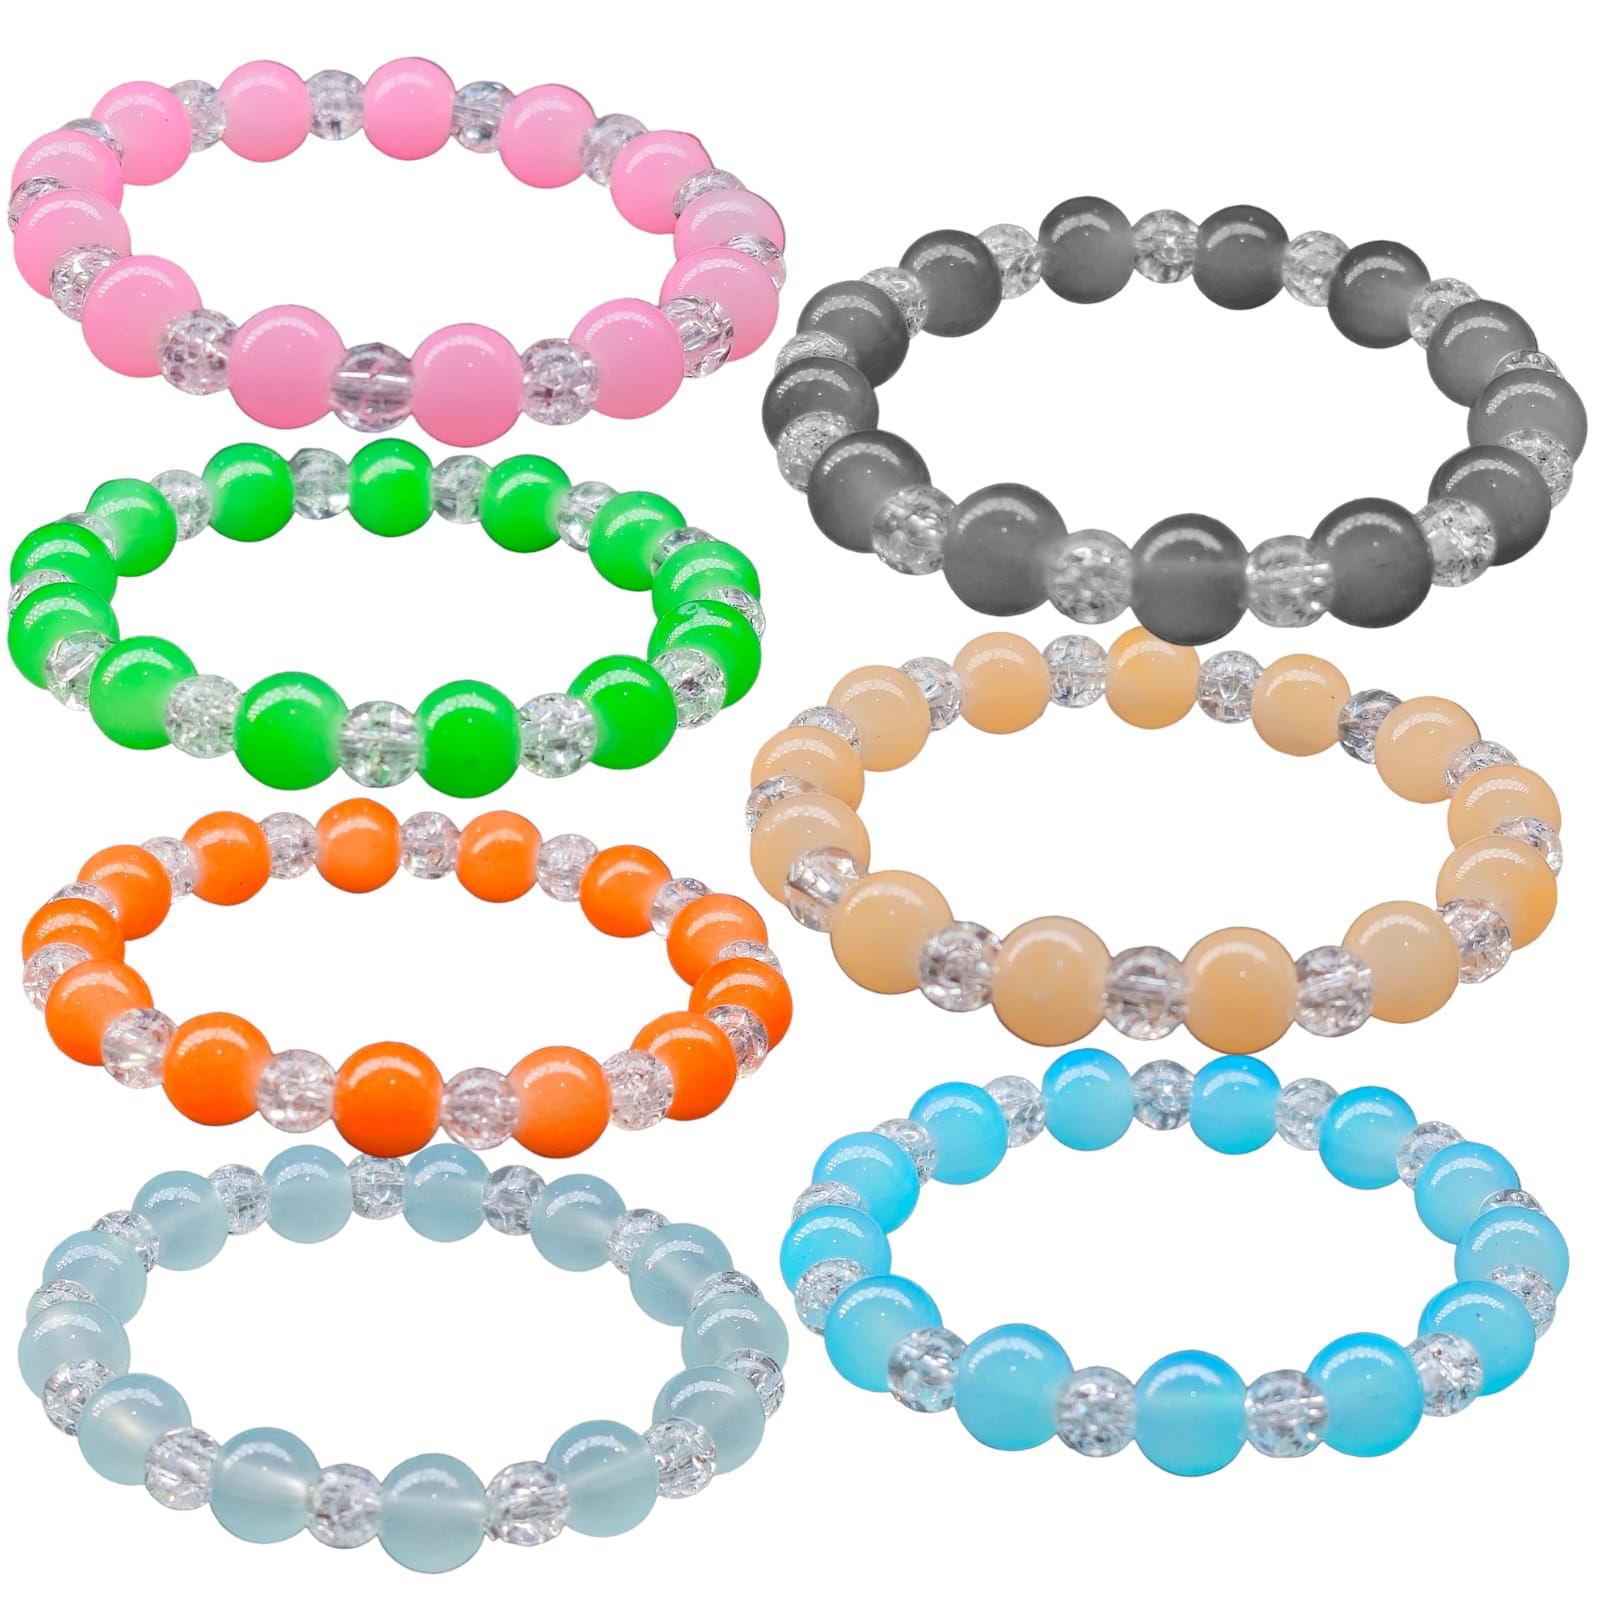 Buy Activation Energising and Focus Miracle Clear Quartz Bracelet Online  From Premium Crystal Store at Best Price - The Miracle Hub